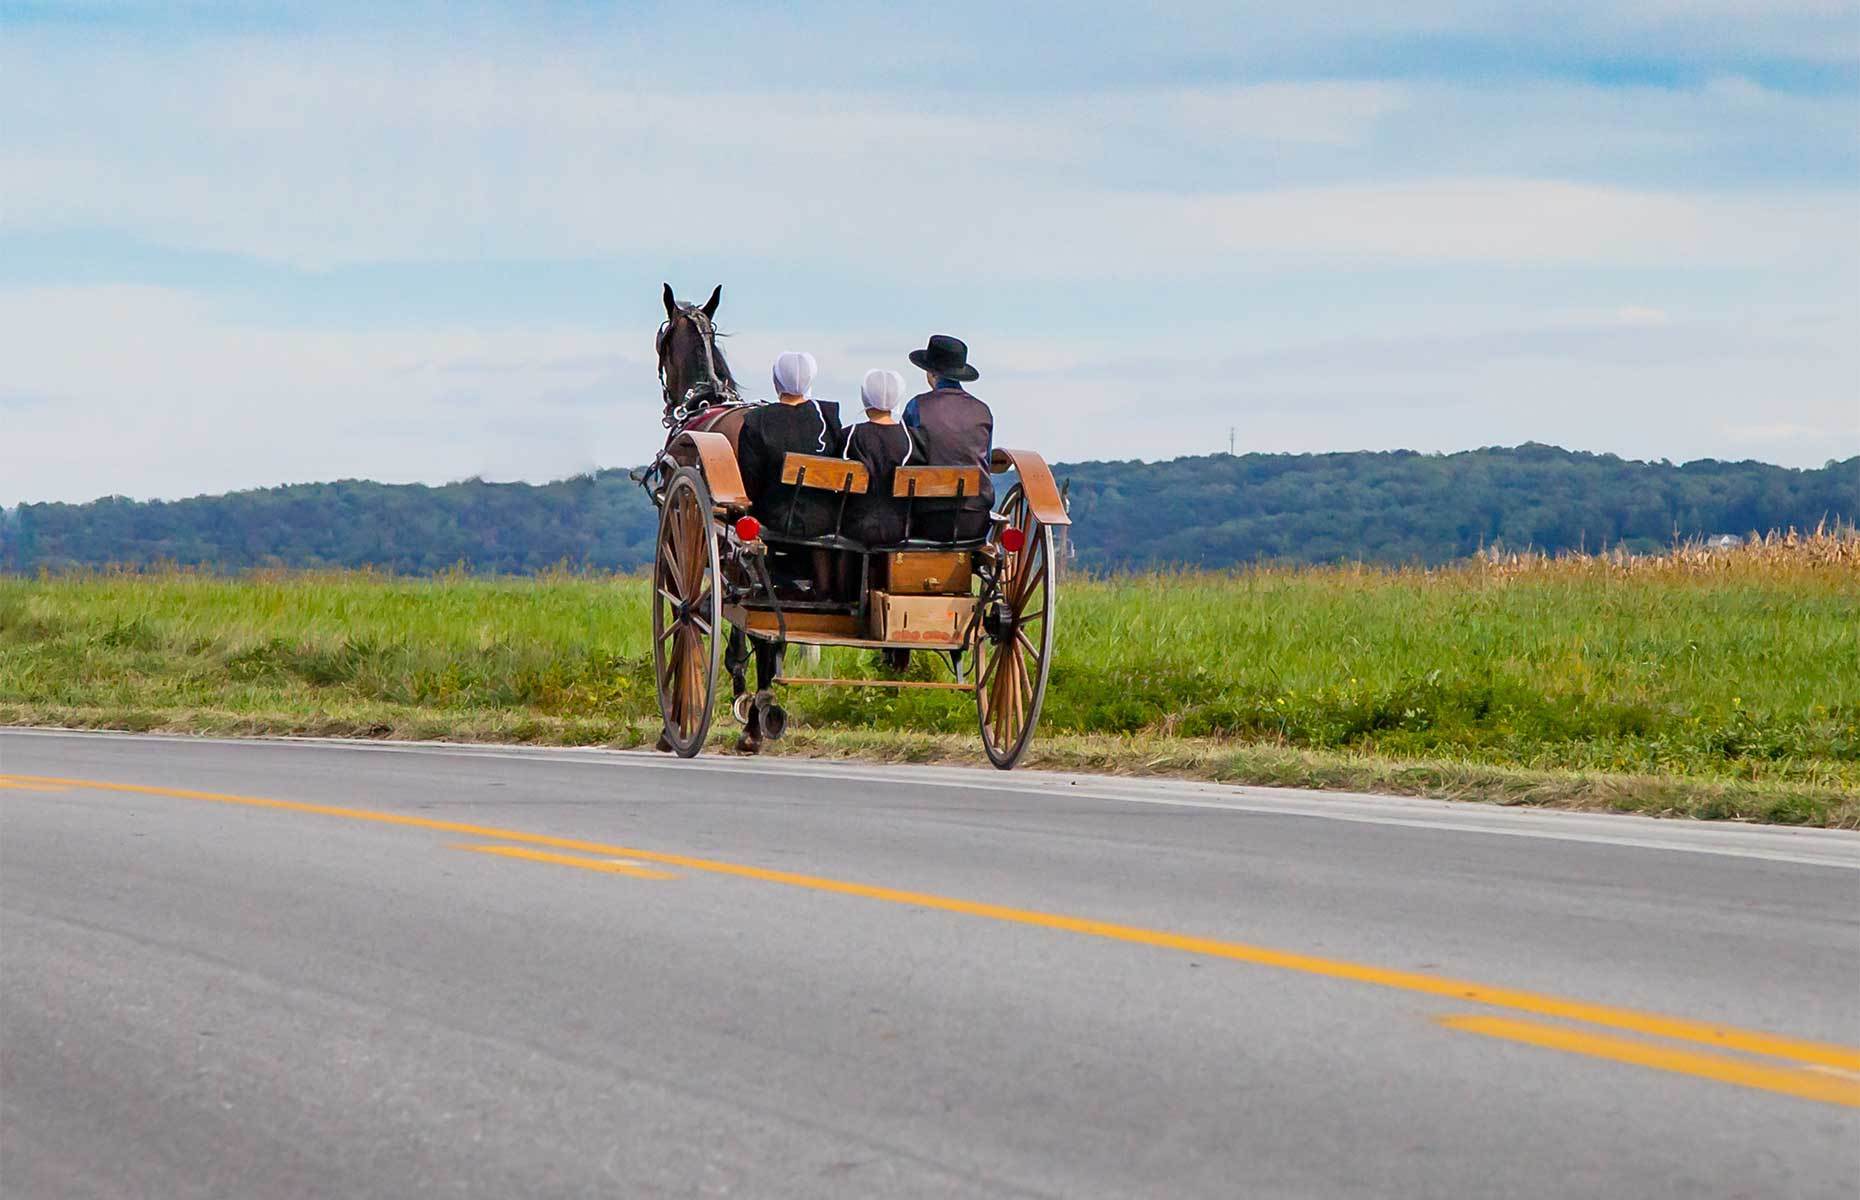 <p class="p1"><span>Life in Lancaster’s Amish community <a href="https://www.discoverlancaster.com/activities/amish-activities.asp" rel="noreferrer noopener"><span>resembles that at the turn of the last century</span></a>. Sign up for a <a href="https://amishcountrybuggyrides.com/?gclid=EAIaIQobChMIyMmi8JyZ5QIVB6SzCh05EgDfEAAYAyAAEgLMw_D_BwE" rel="noreferrer noopener"><span>guided tour</span></a> to learn more about their simple, self-sufficient lifestyle.</span></p>